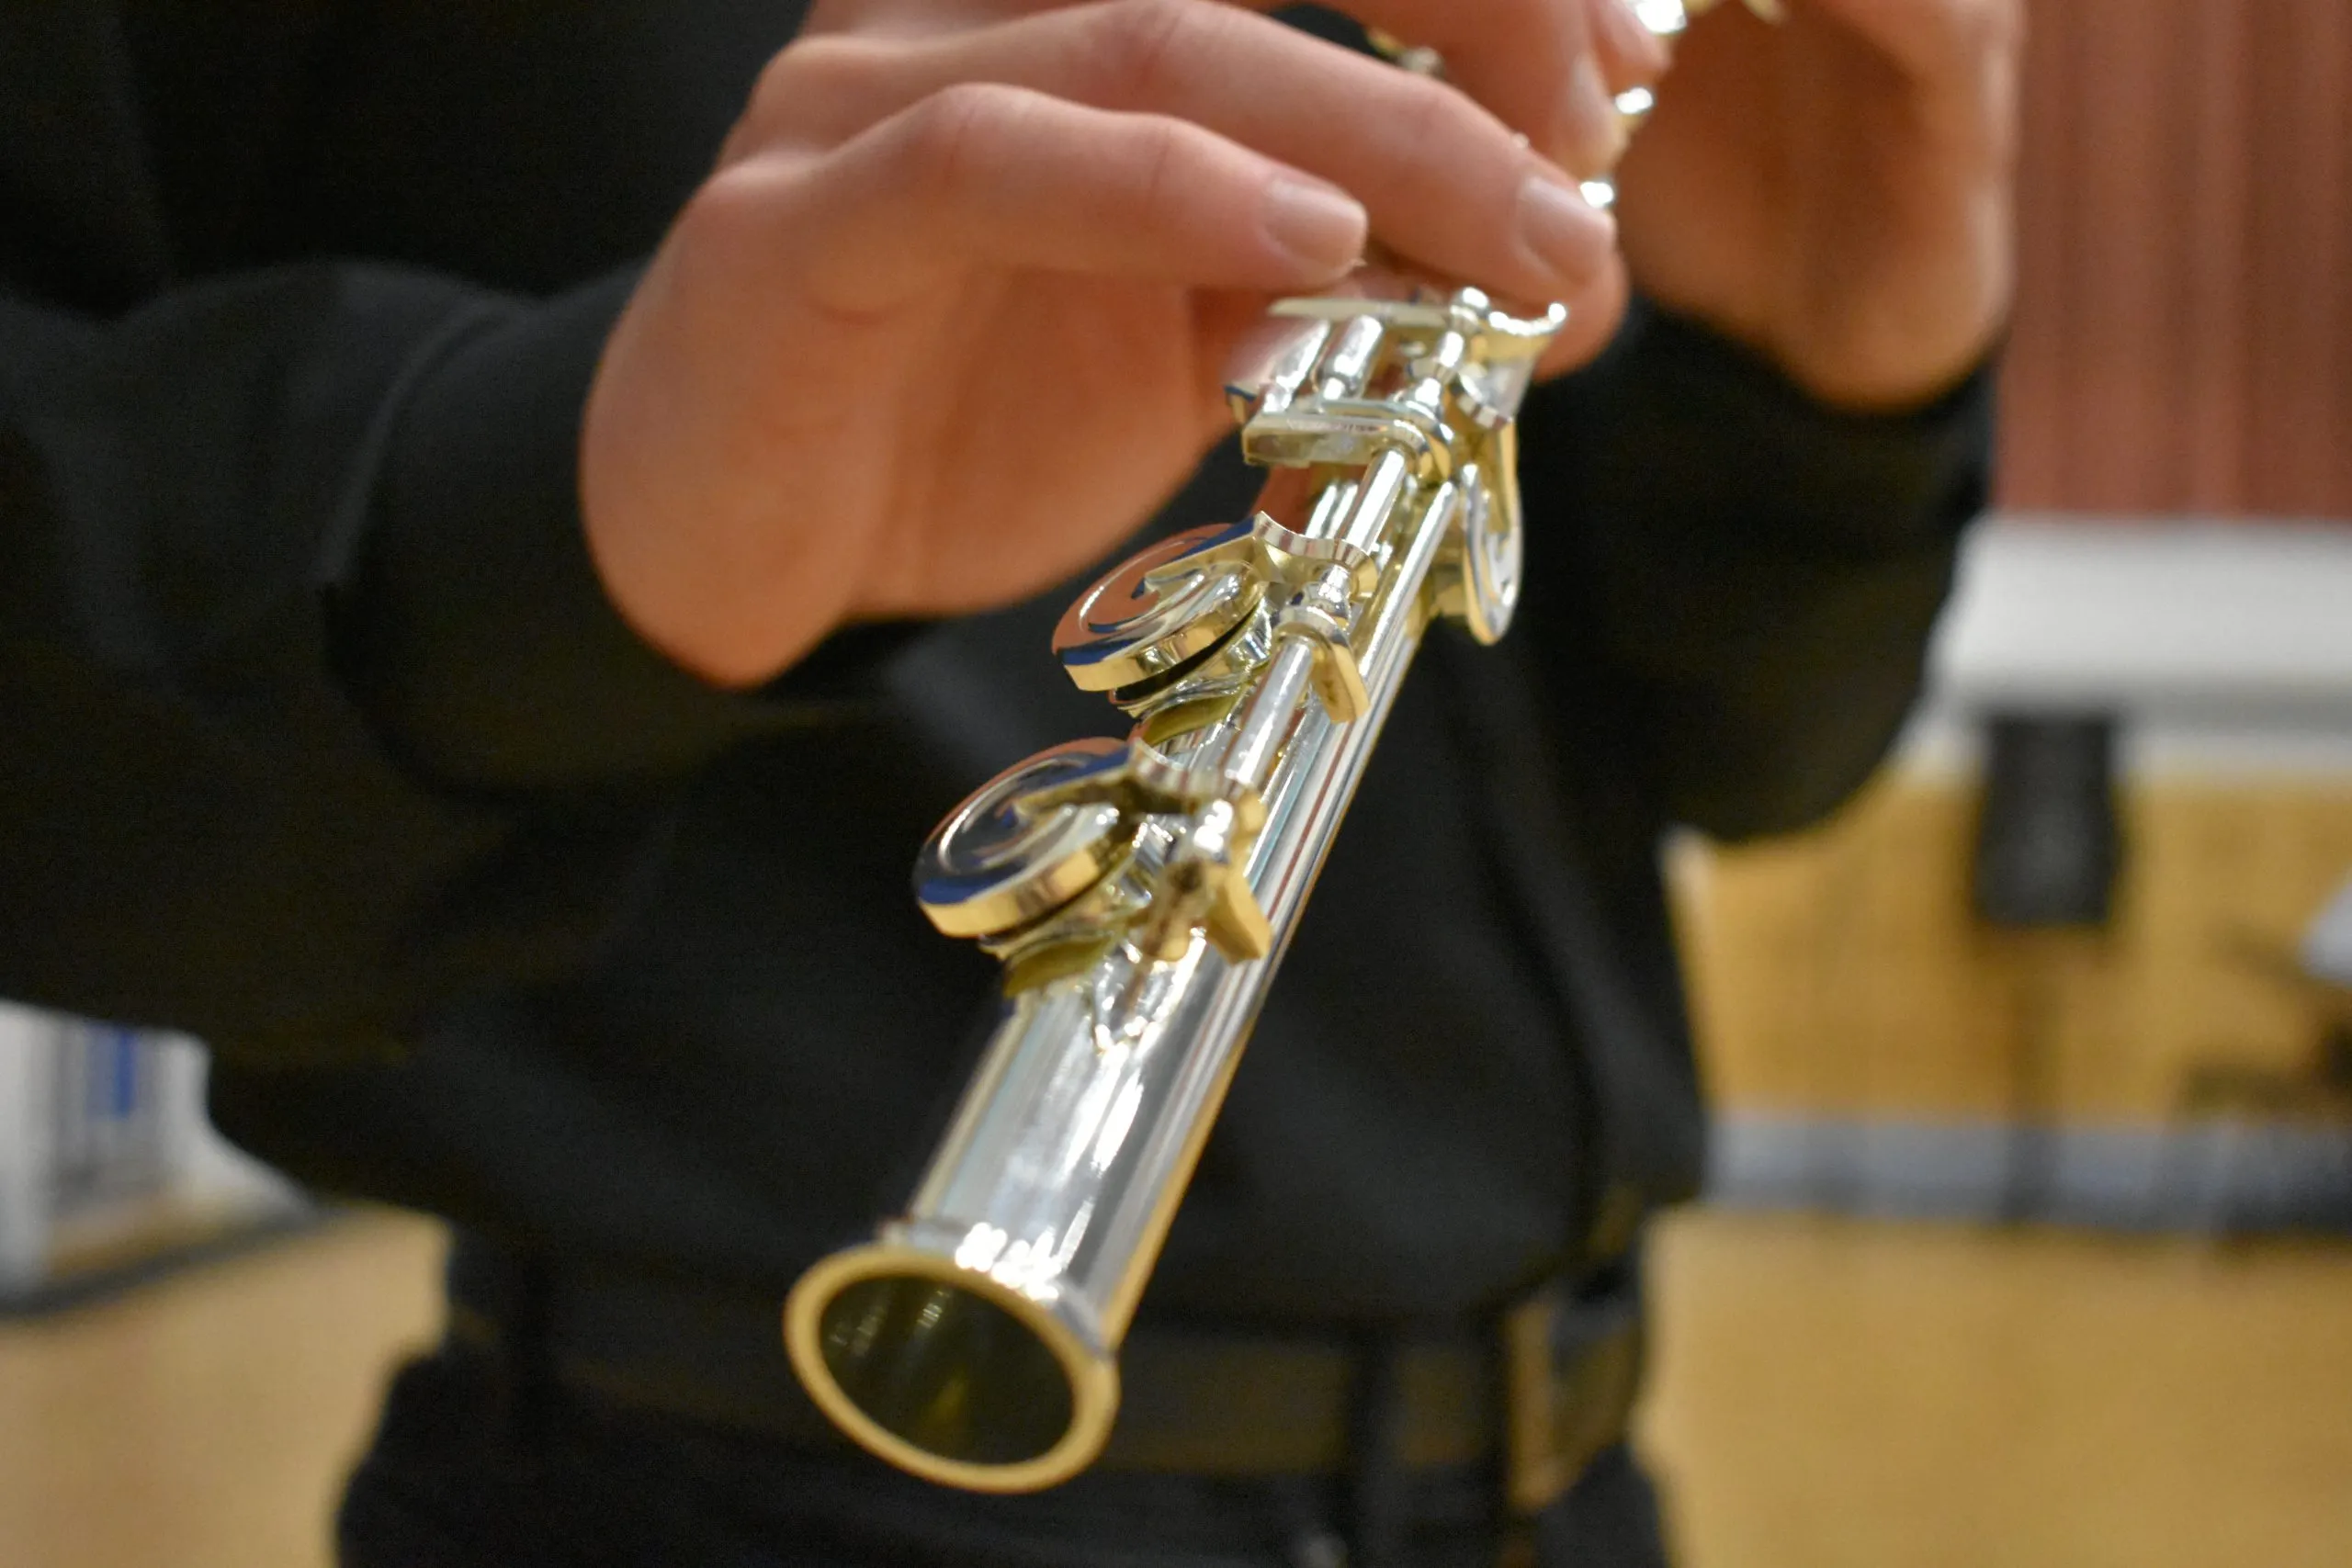 A closeup image of Jacob playing flute, showing the keys at the end of the flute with Jacob blurred in the background